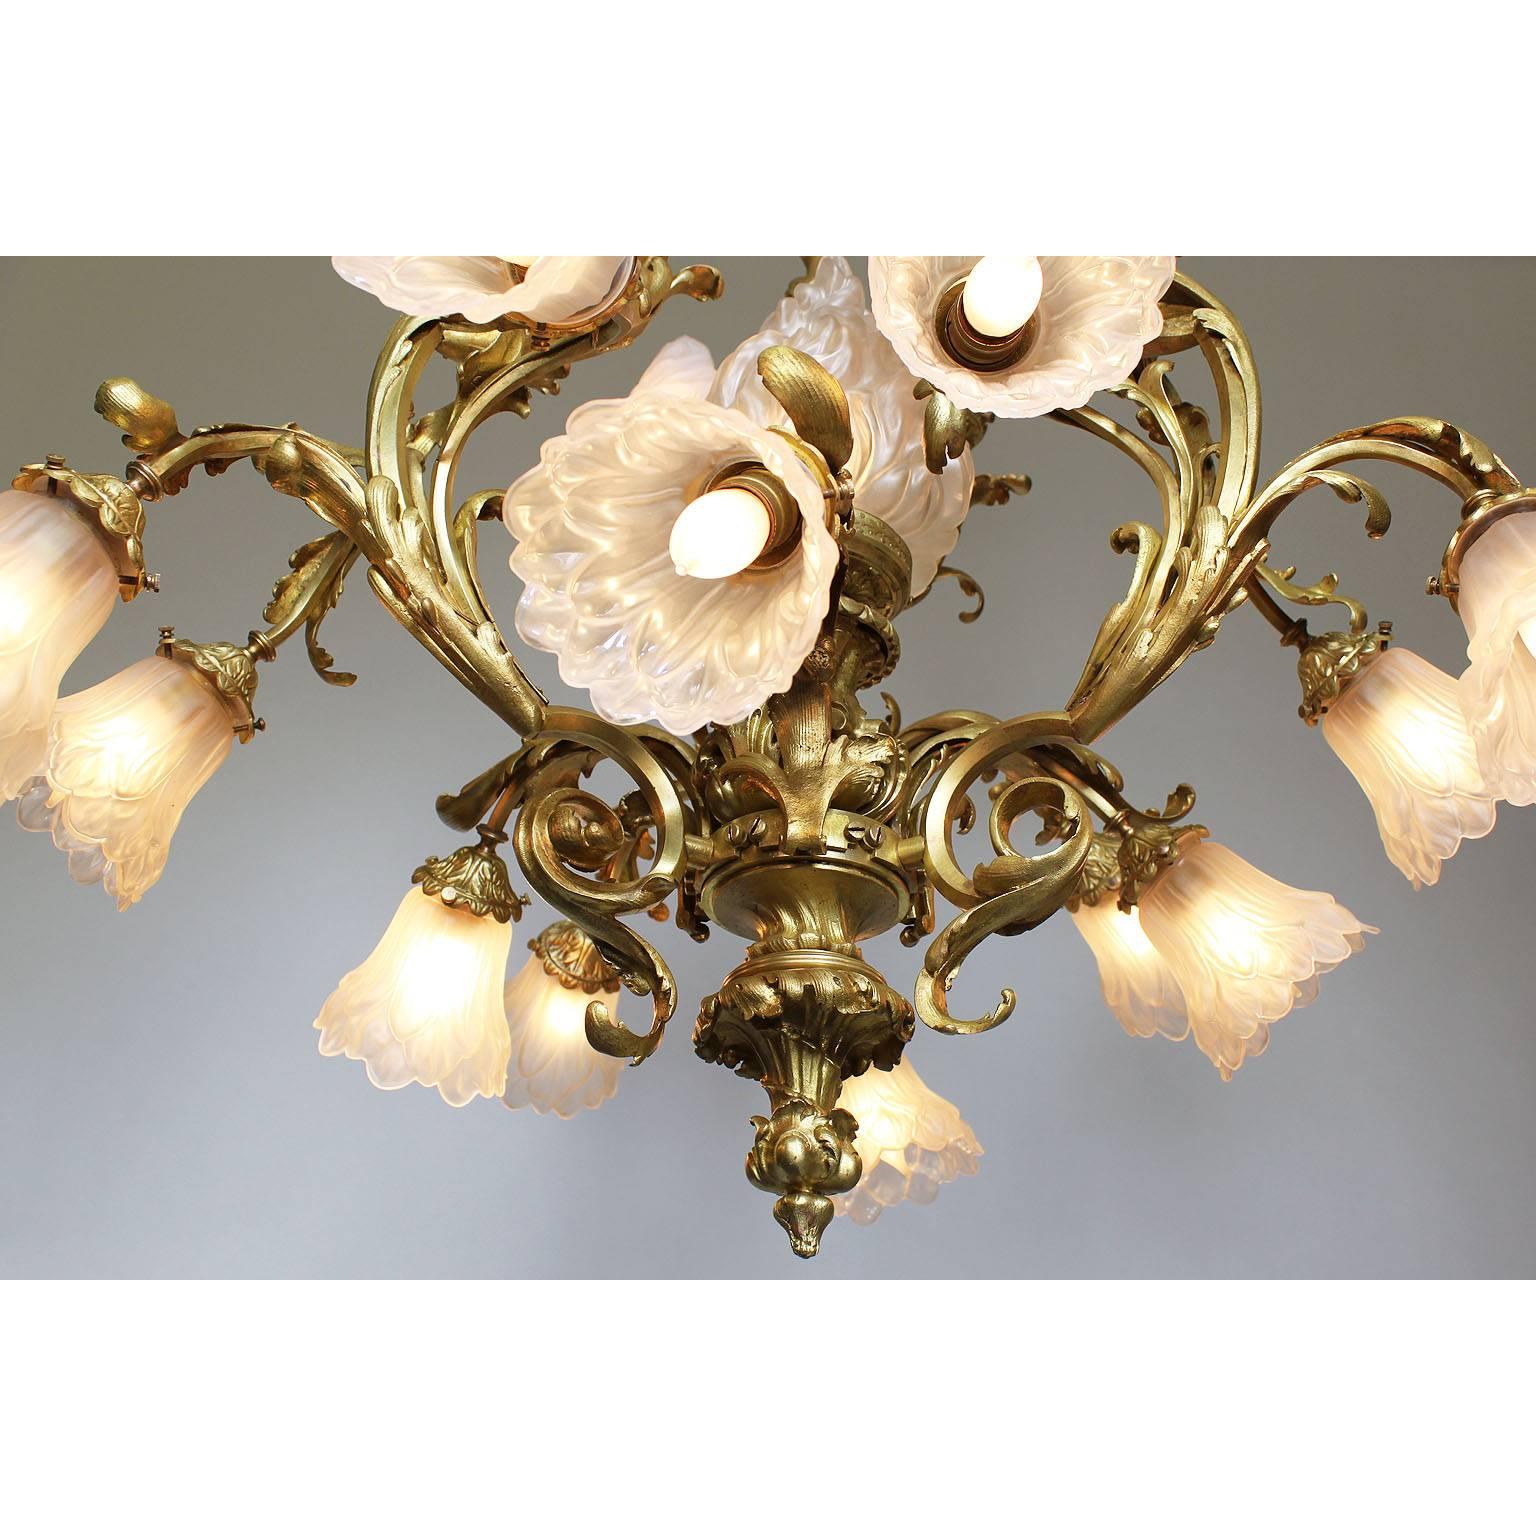 French Belle Époque Rococo Style Gilt-Bronze and Frosted Glass Shades Chandelier For Sale 1